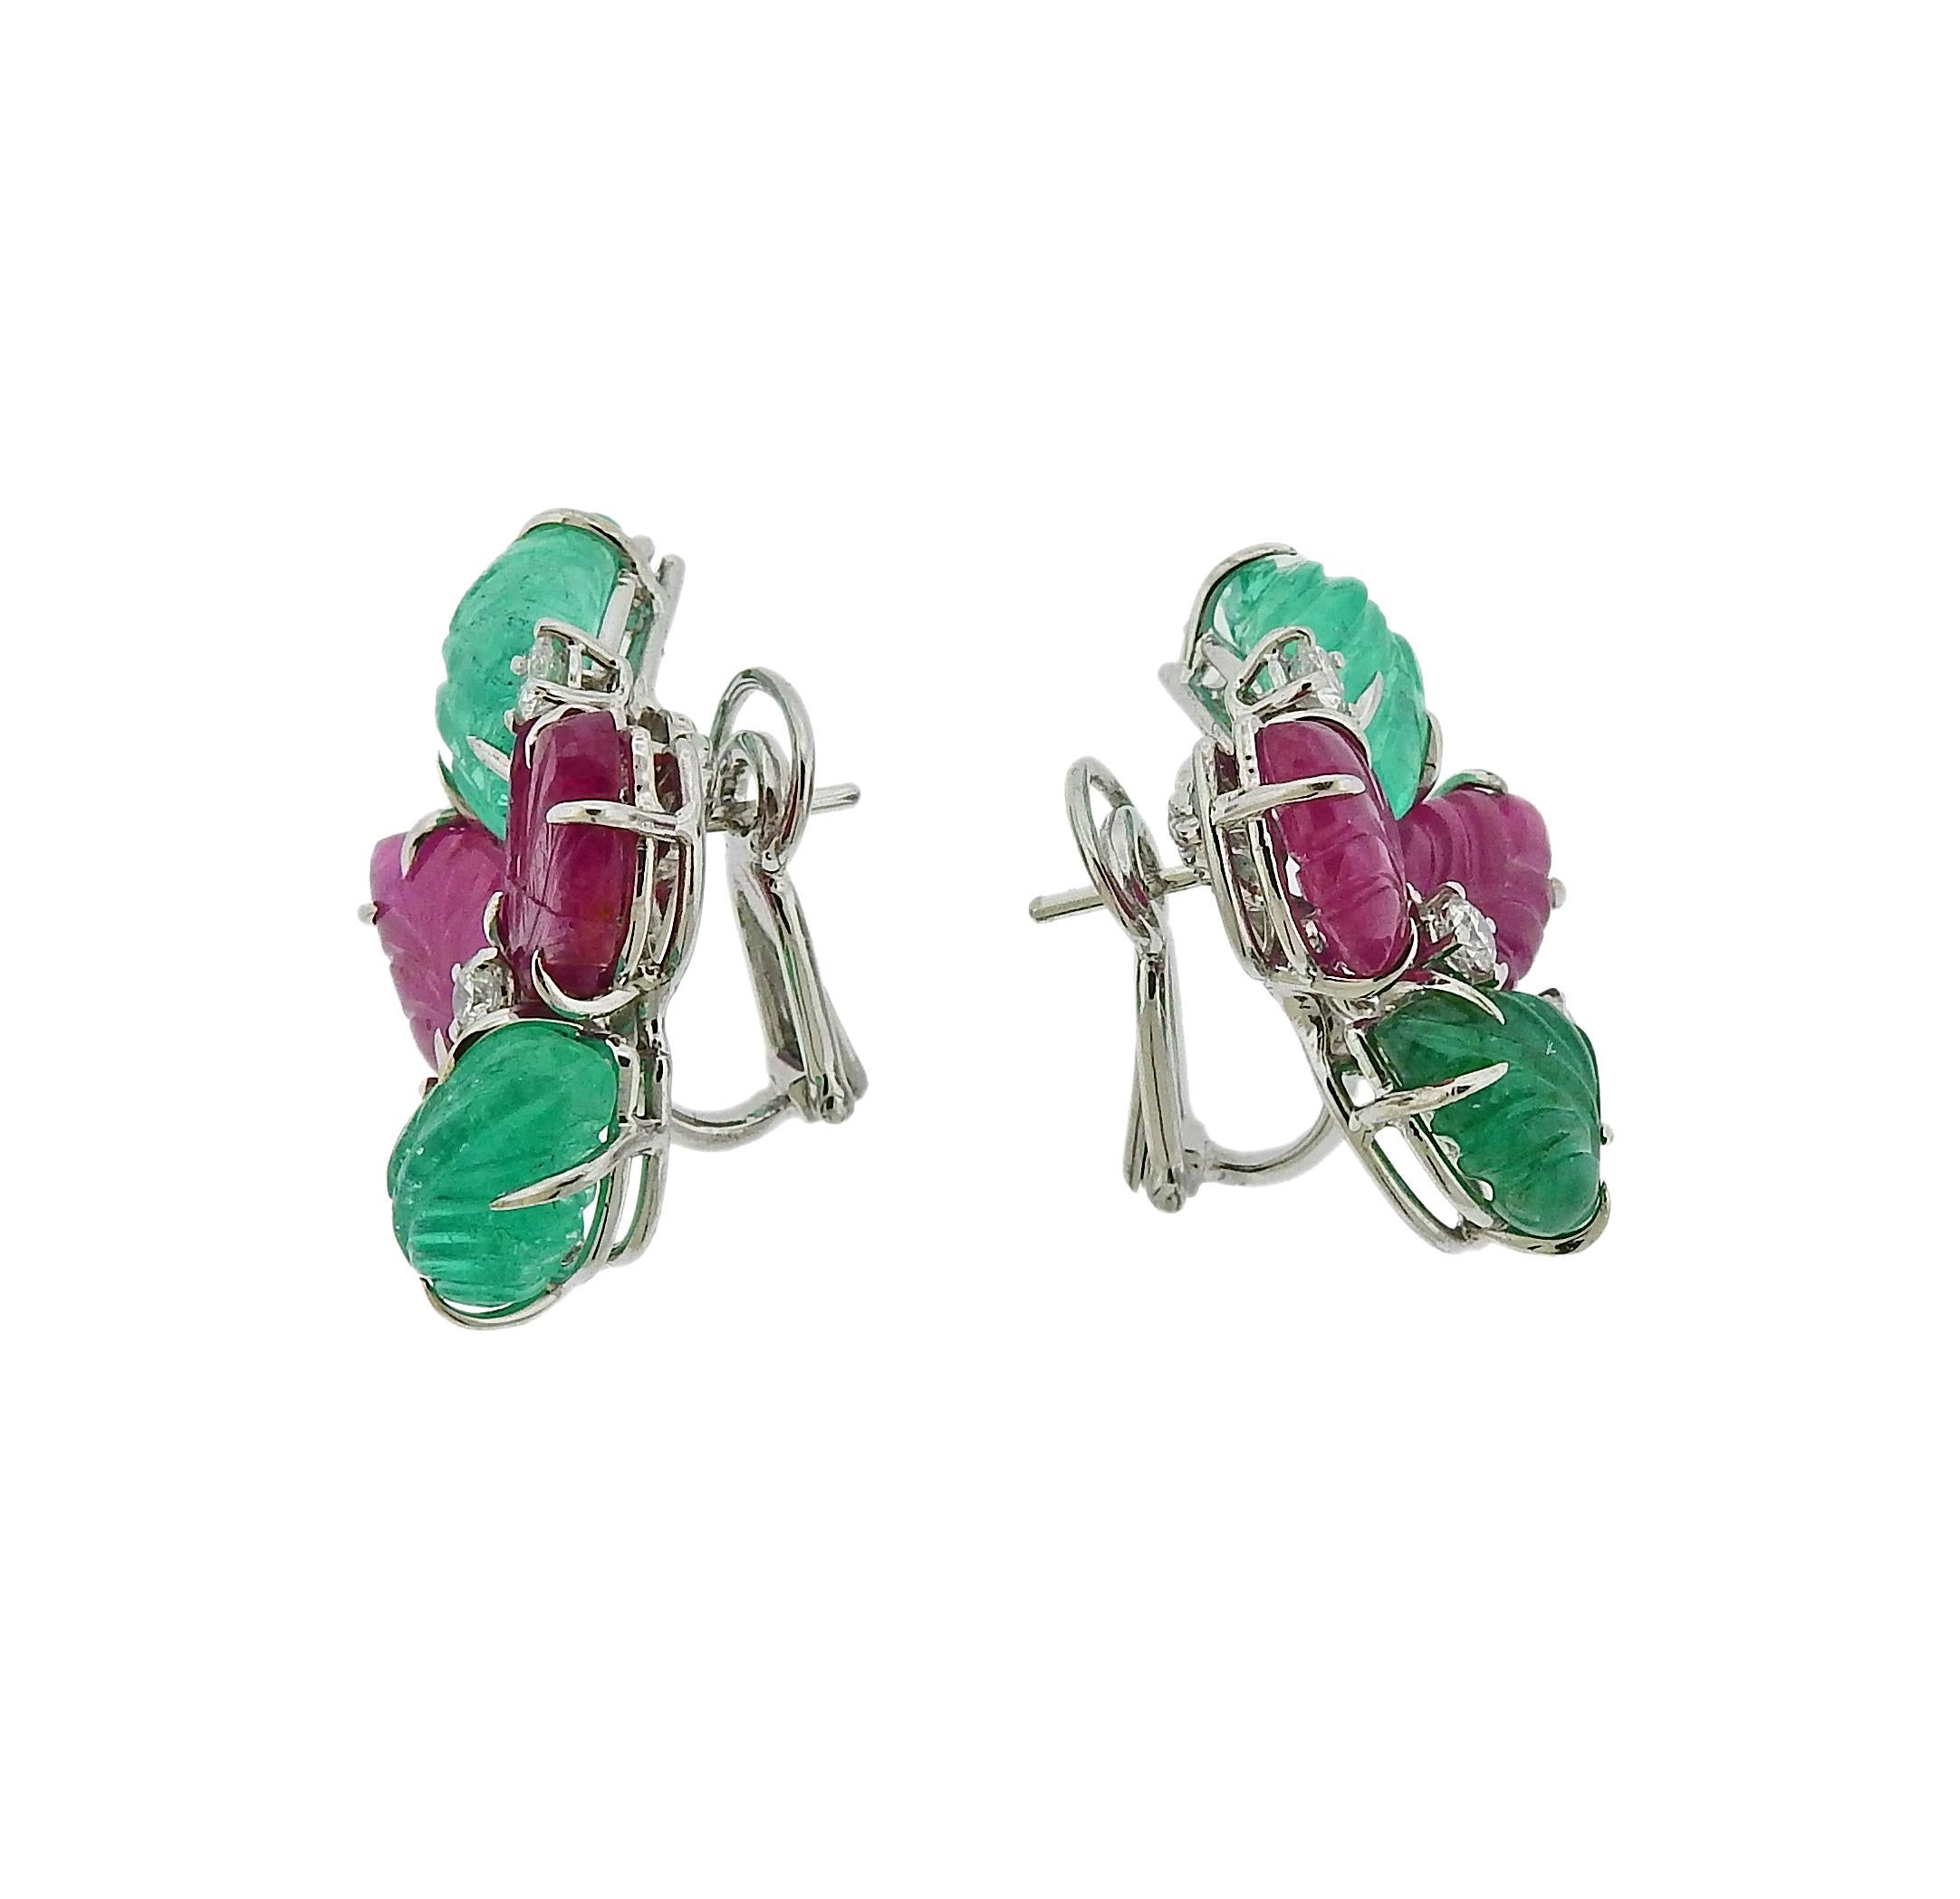 Pair of beautiful 18k white gold tutti frutti earrings, crafted by Roberto Coin, set with approx. 4.50ctw in carved rubies, 4.75ctw in carved emeralds and approx. 0.30ctw in G/VS diamonds.  Earrings are 28mm x 18mm. Weigh 13 grams. Marked: 750,